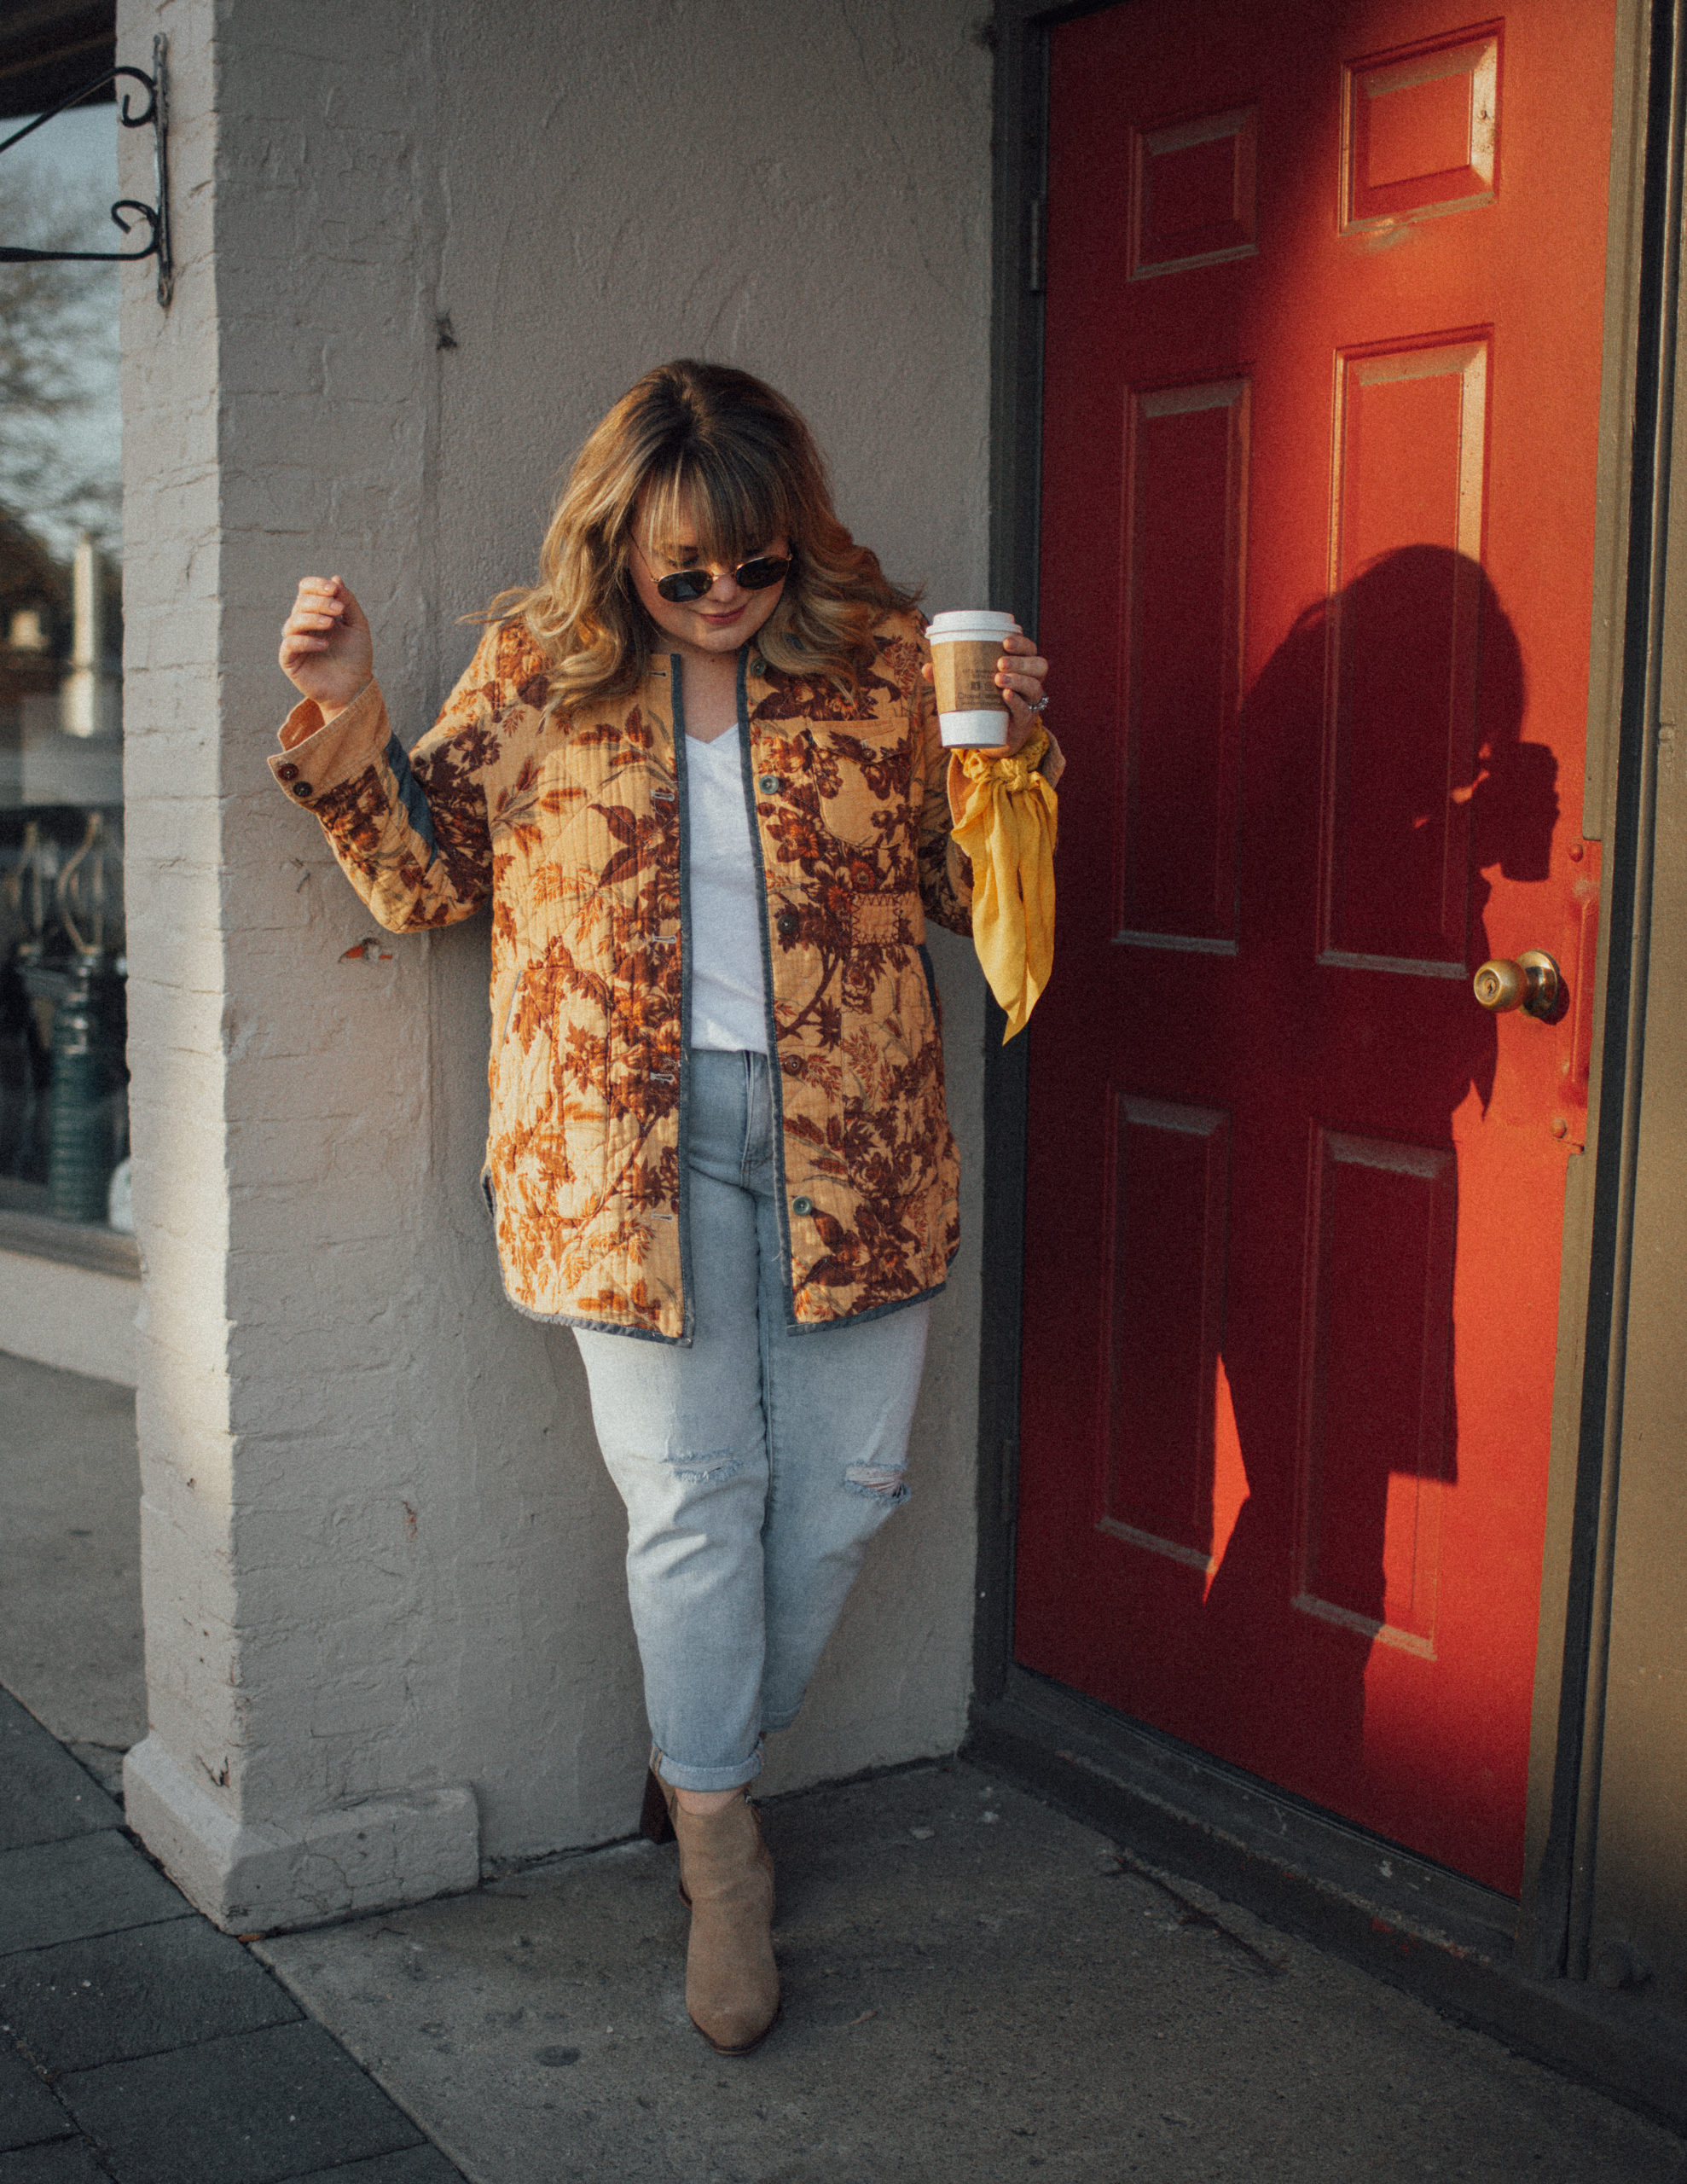 Sharing a roundup of Boho Spring Jackets from plus size retailers. Spring means lighter layers and getting outside more, boho chic style. 